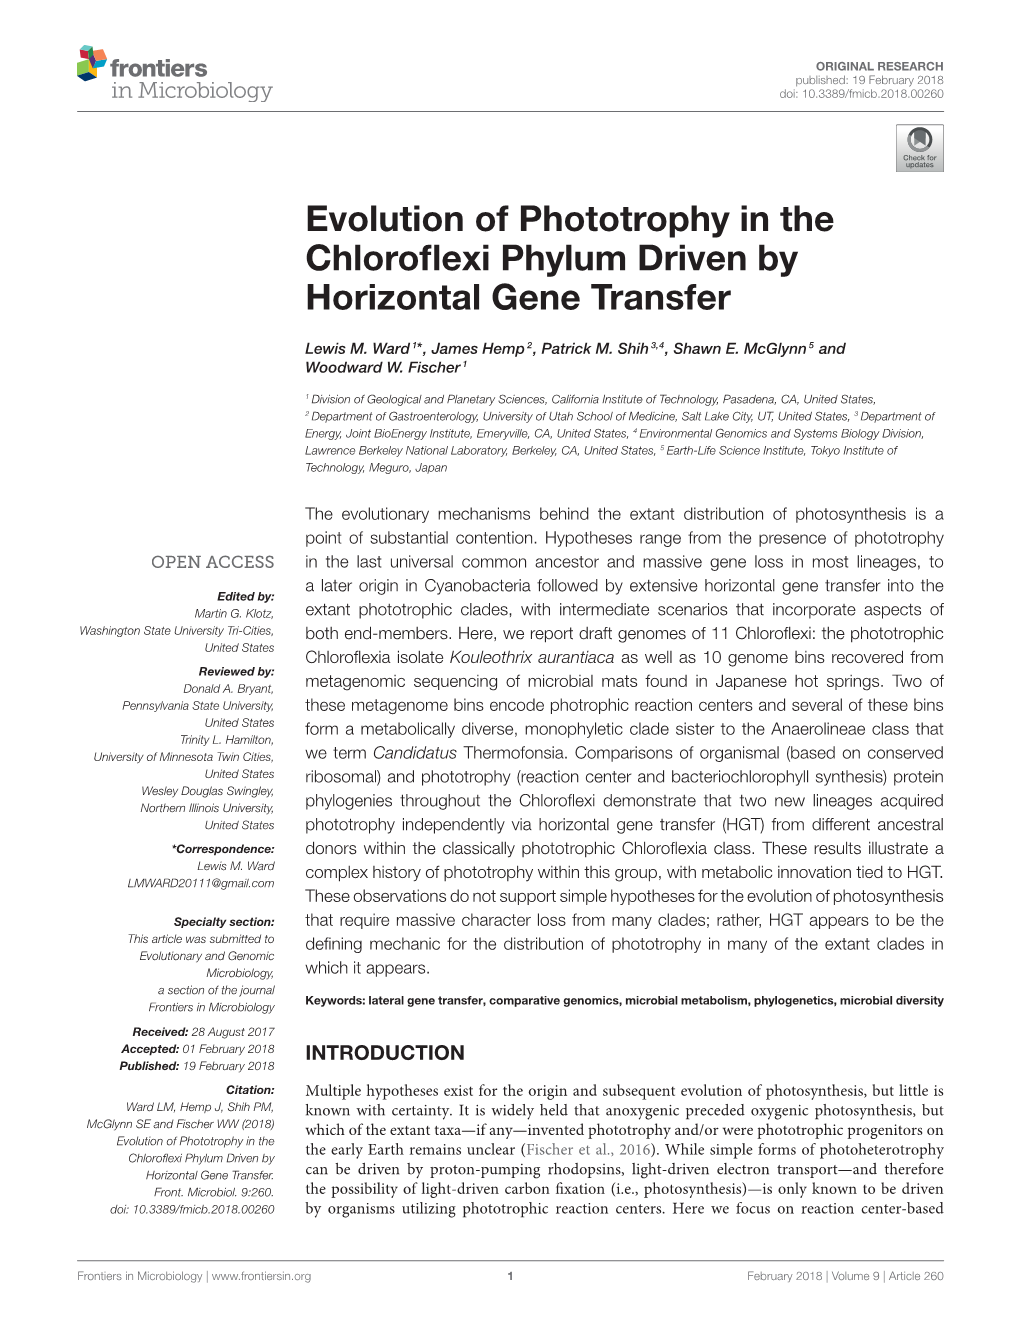 Evolution of Phototrophy in the Chloroflexi Phylum Driven By